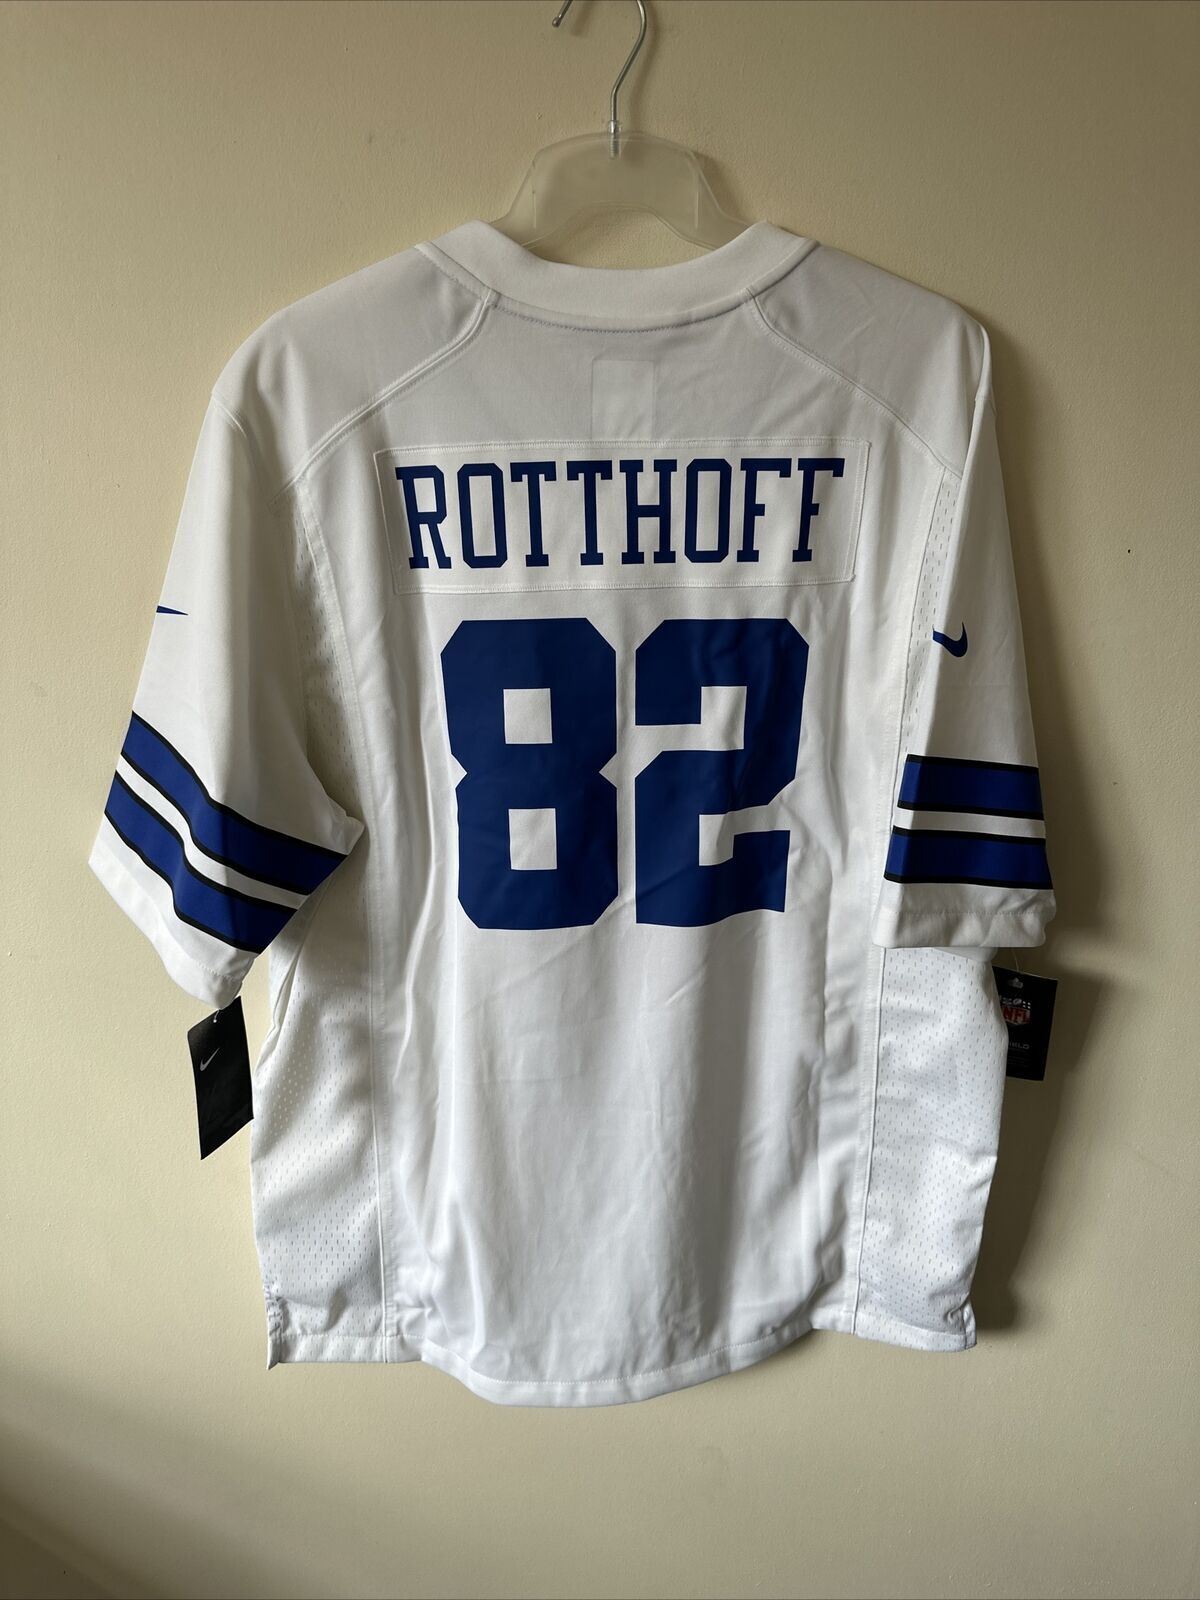 Nike NFL Dallas Cowboys Road Game Jersey ROTTHOFF 82 Mens Size Large